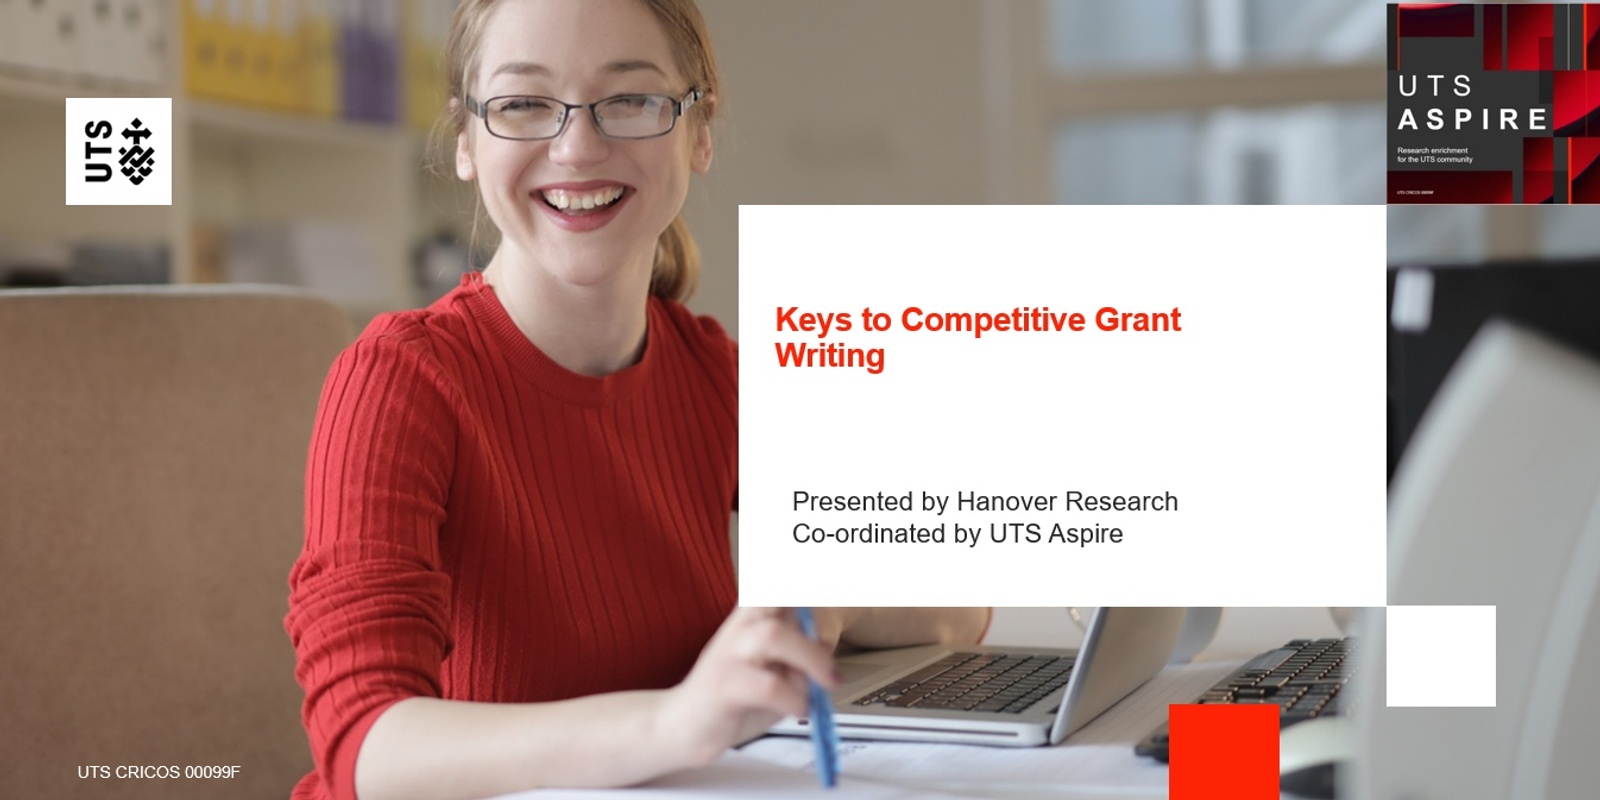 Hanover Research - Keys to Competitive Grant Writing